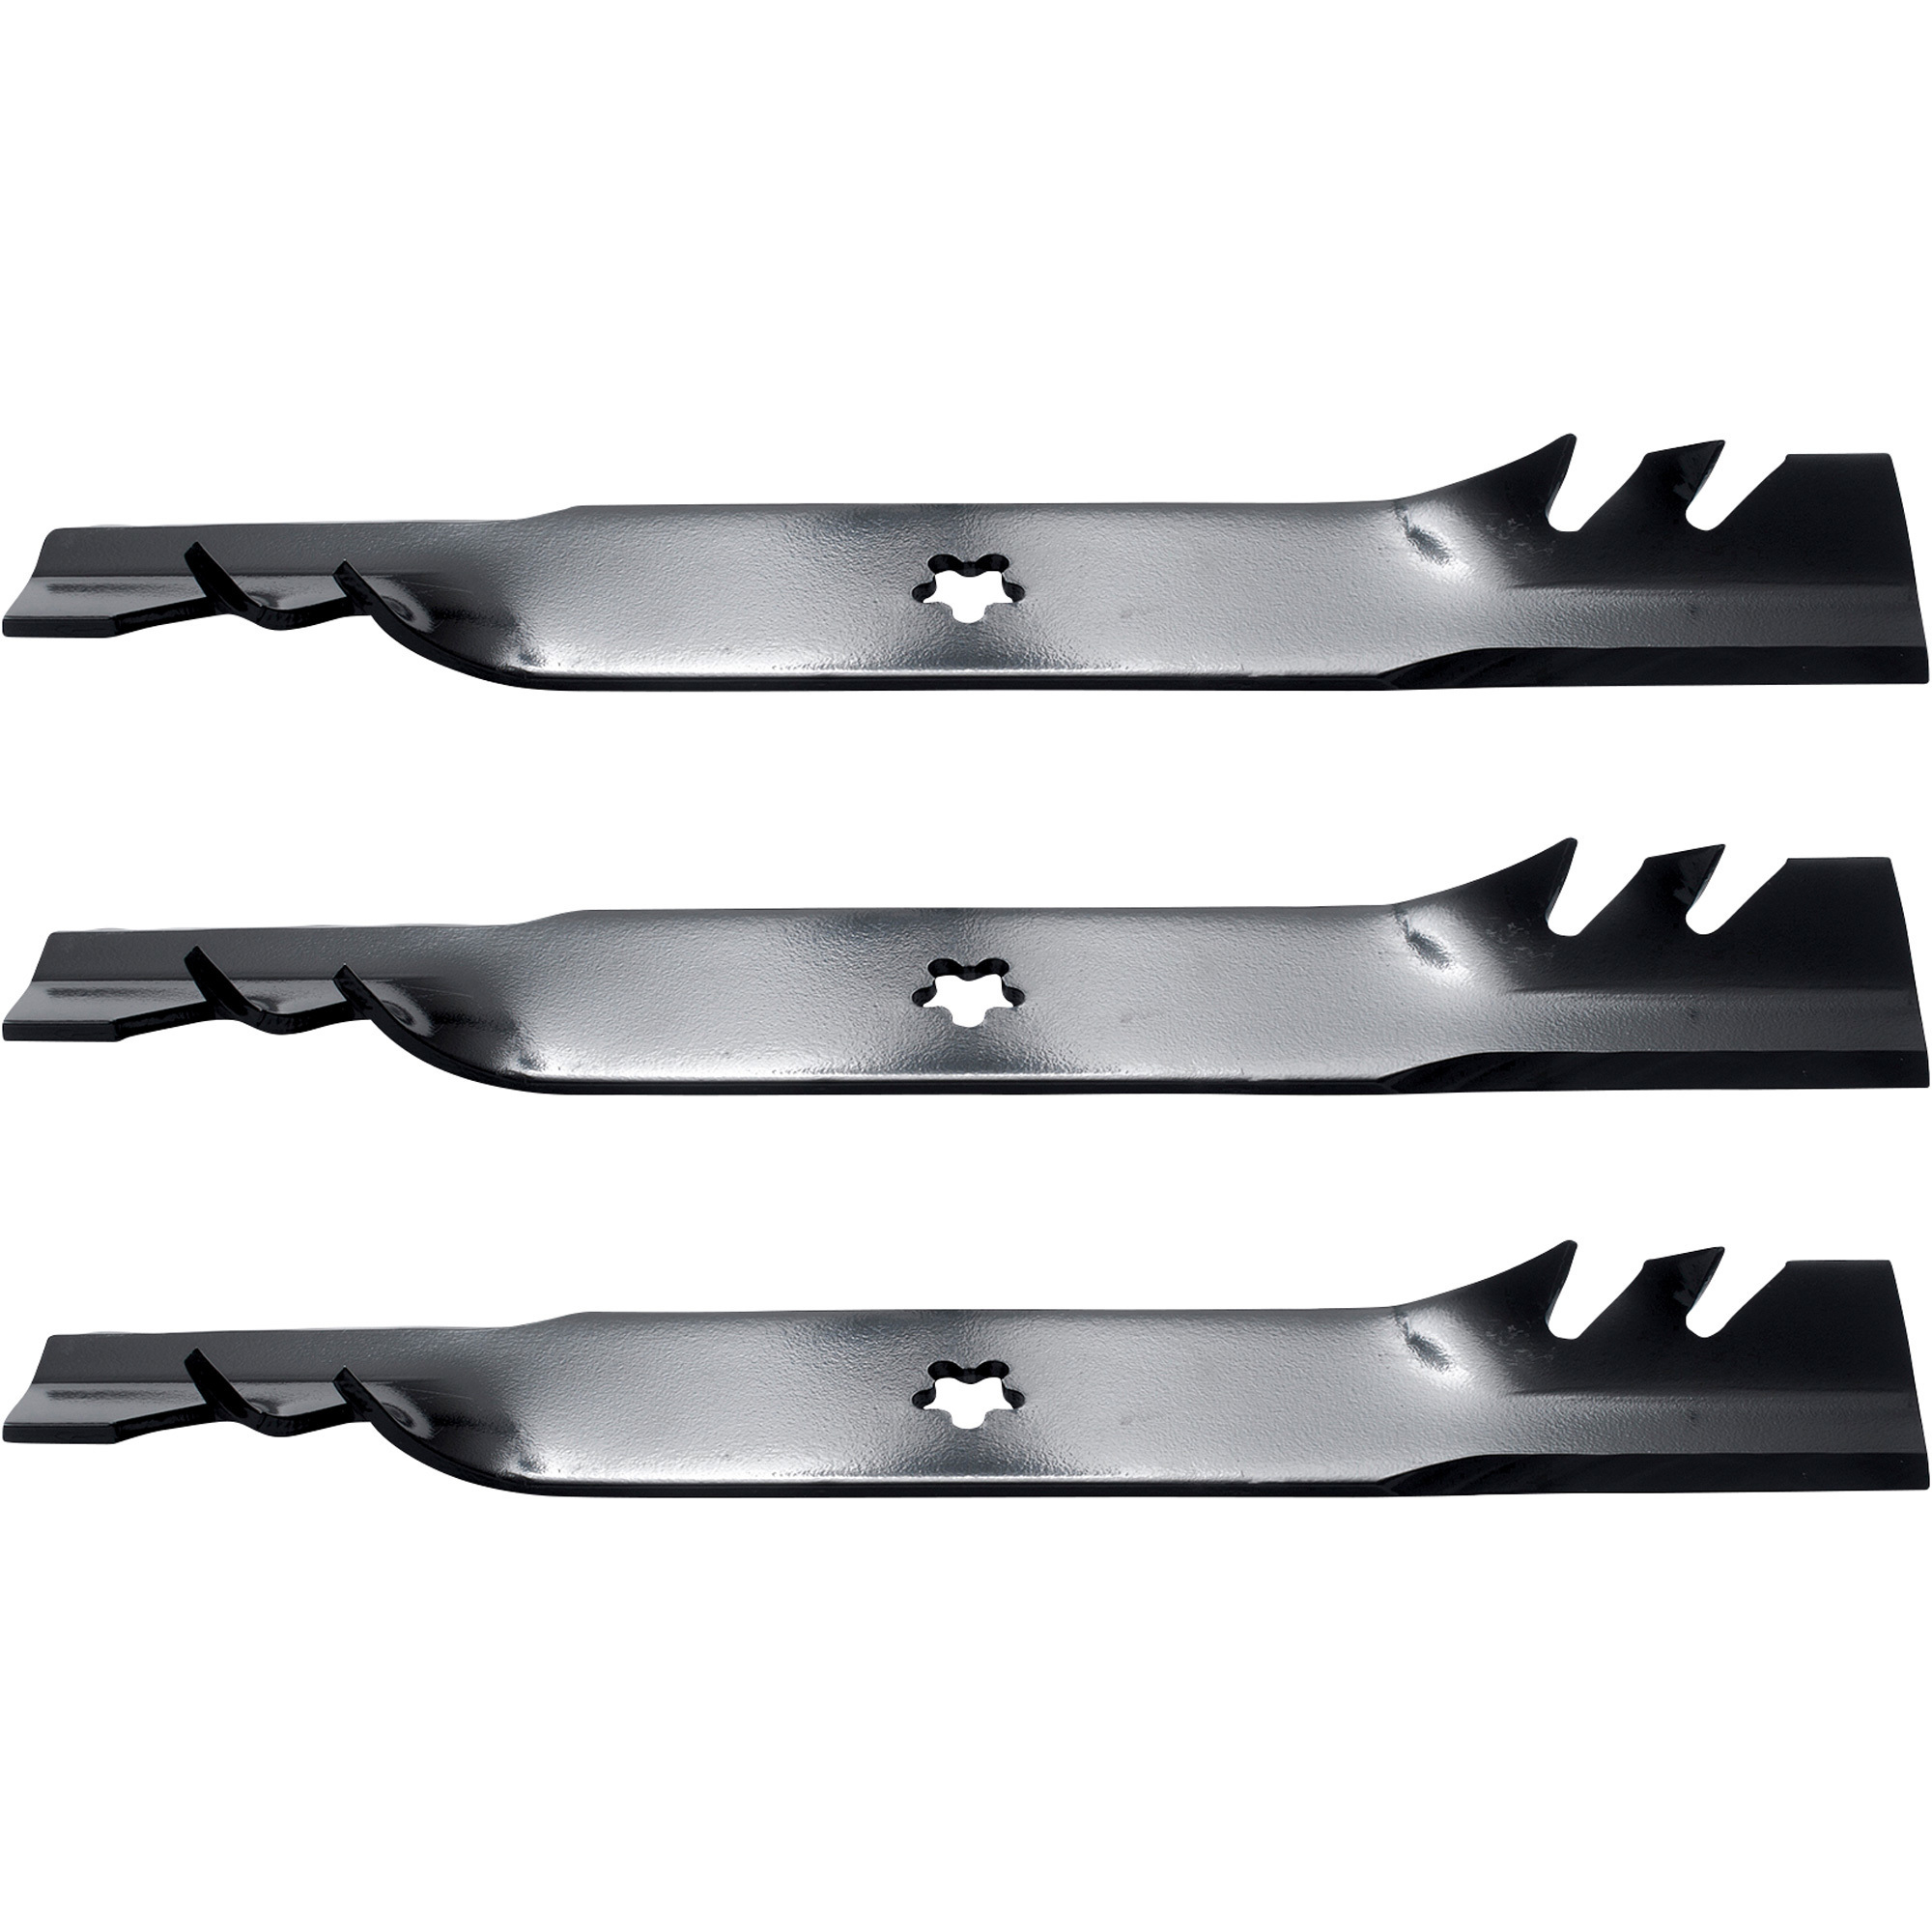 Oregon Gator G3 Replacement Lawn Mower Blades, 3-Piece Set, Fits 48Inch Mowers, Model 528968